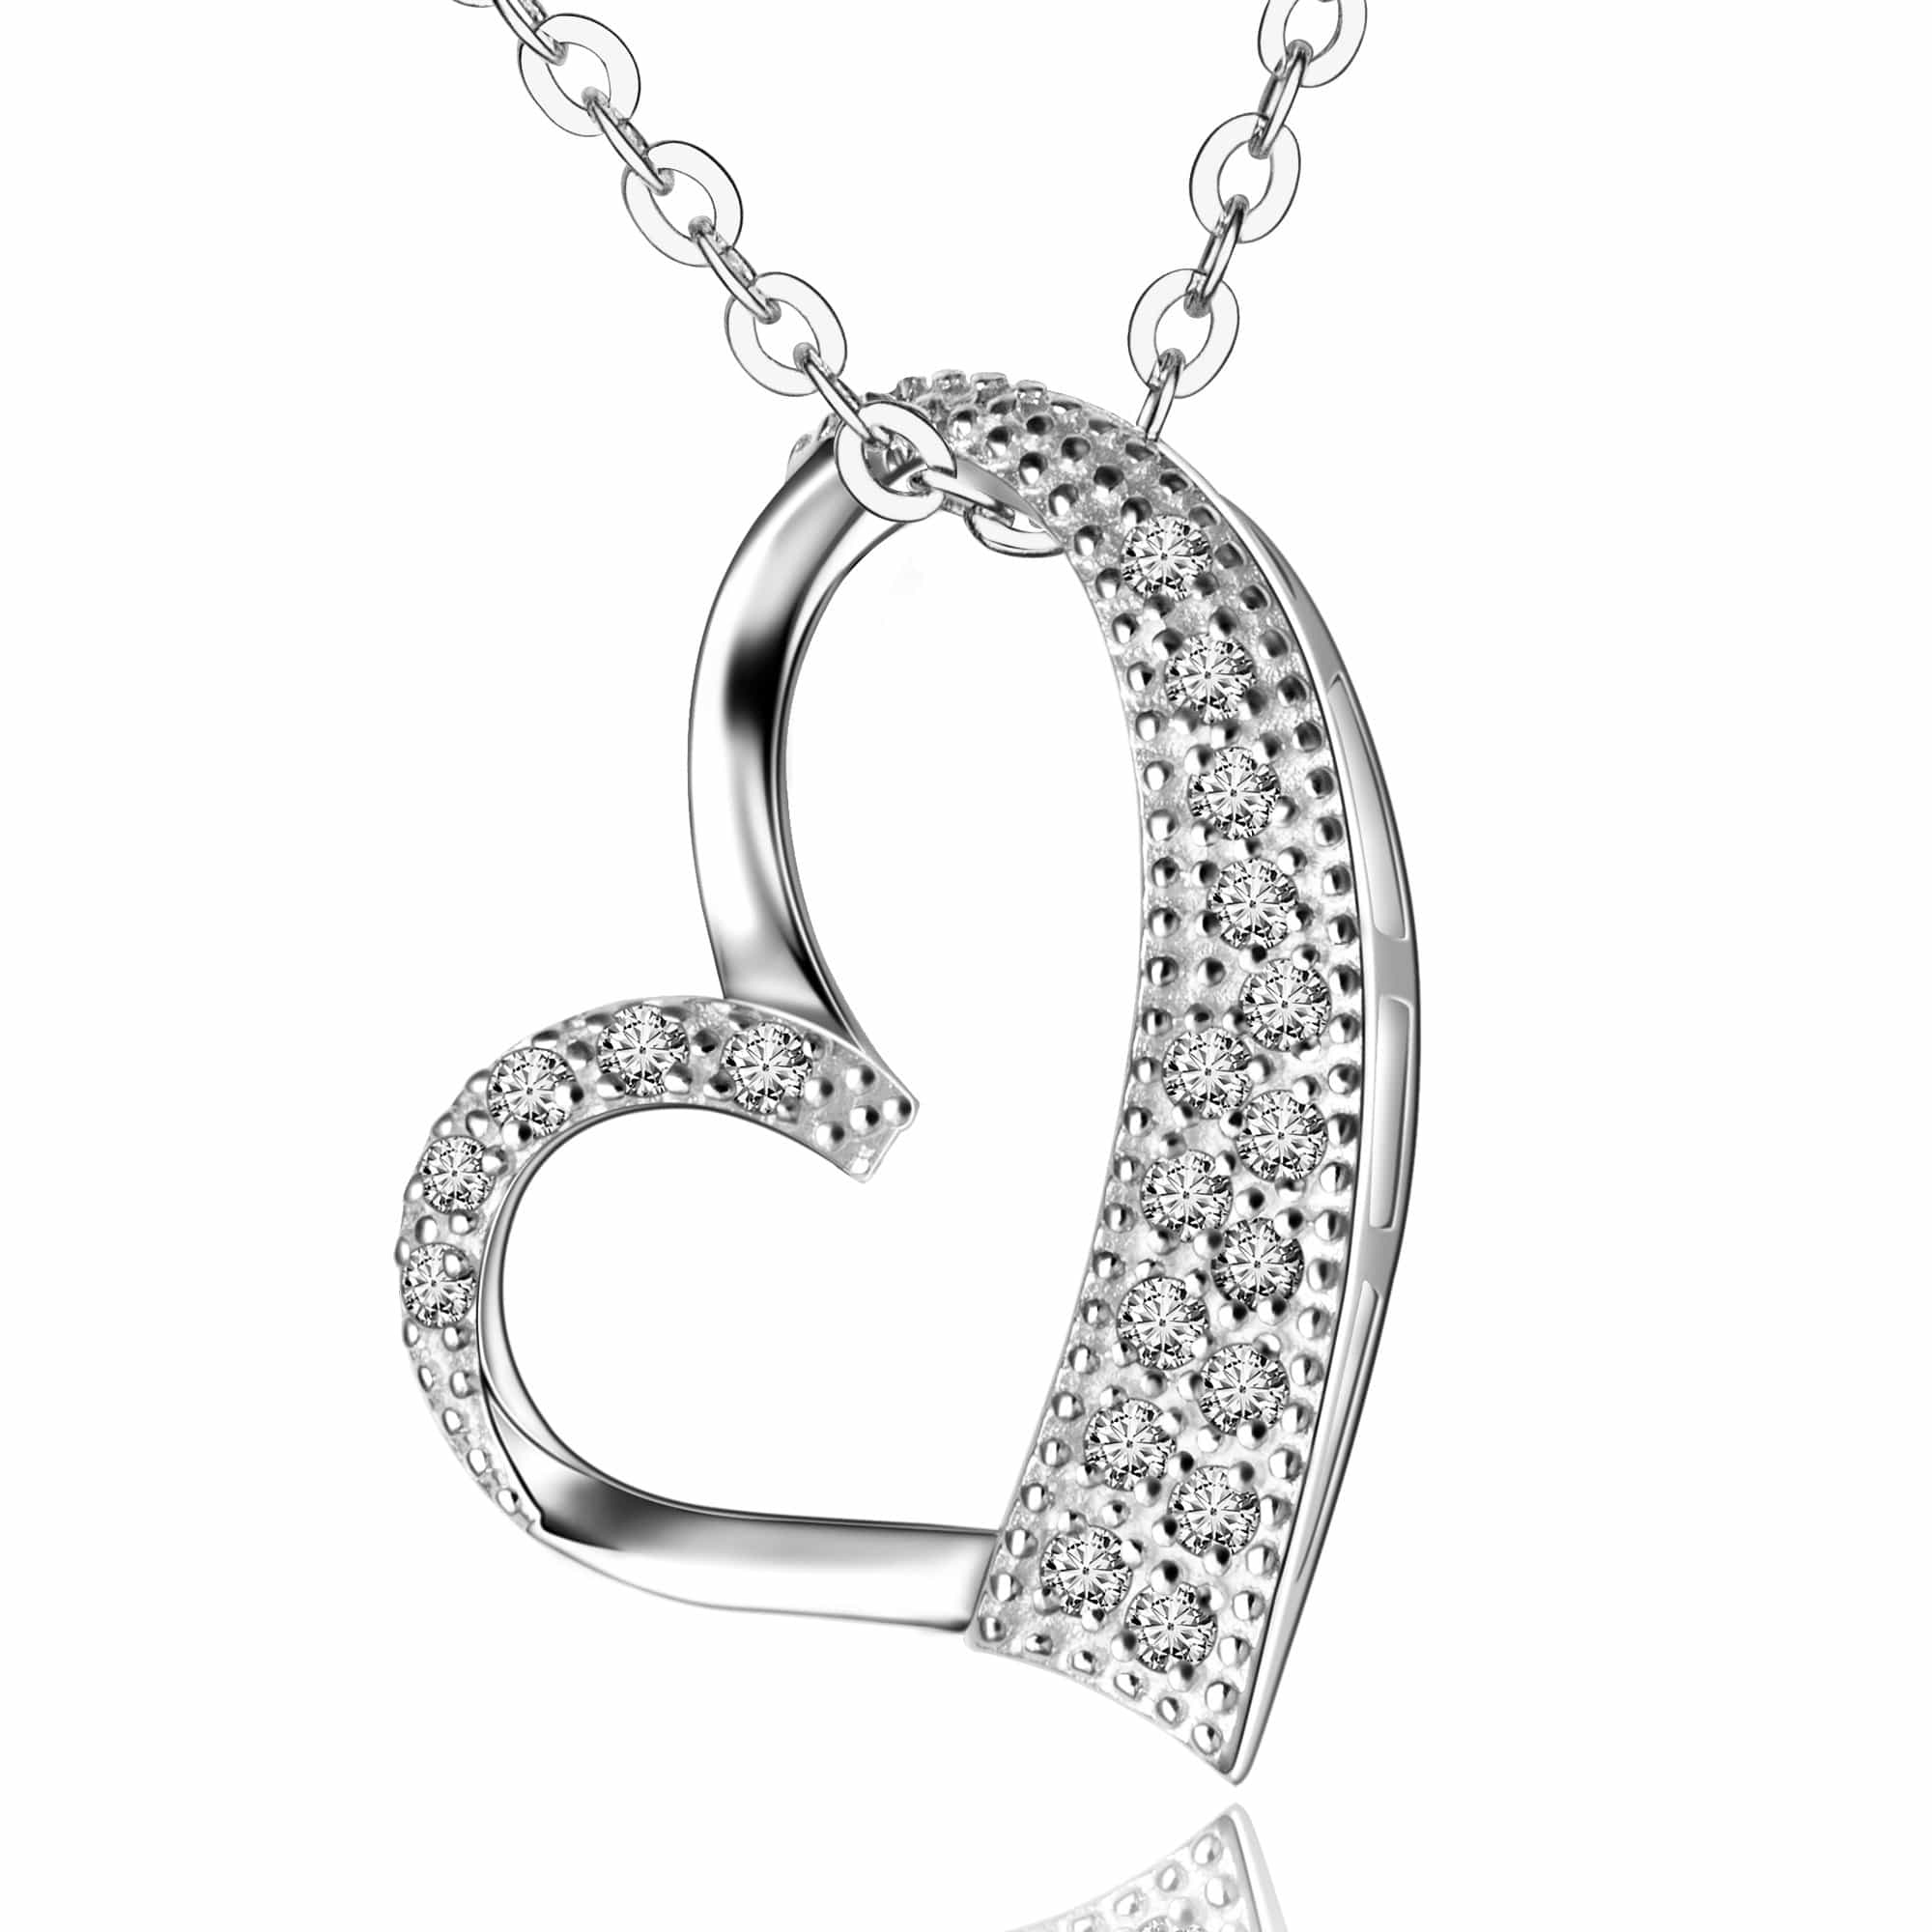 Sterling Silver Open Heart Necklace Pendant Necklace Pendant + Chain